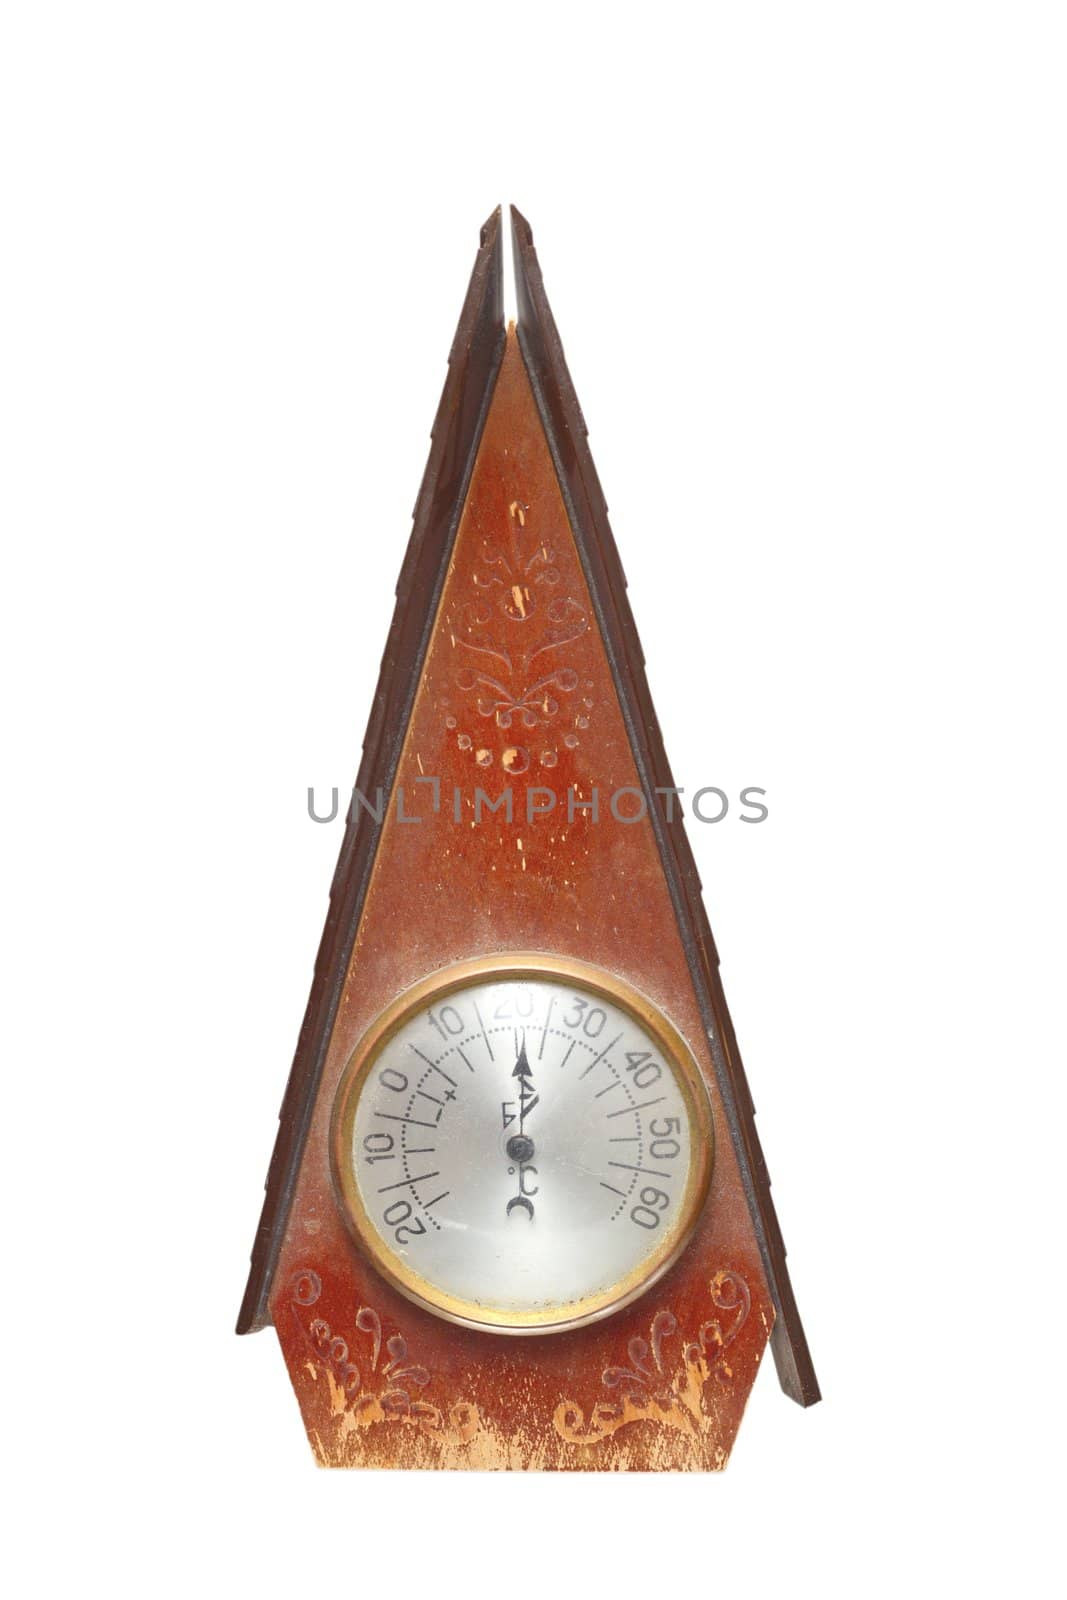 vintage thermometer in a wooden frame isolated on white